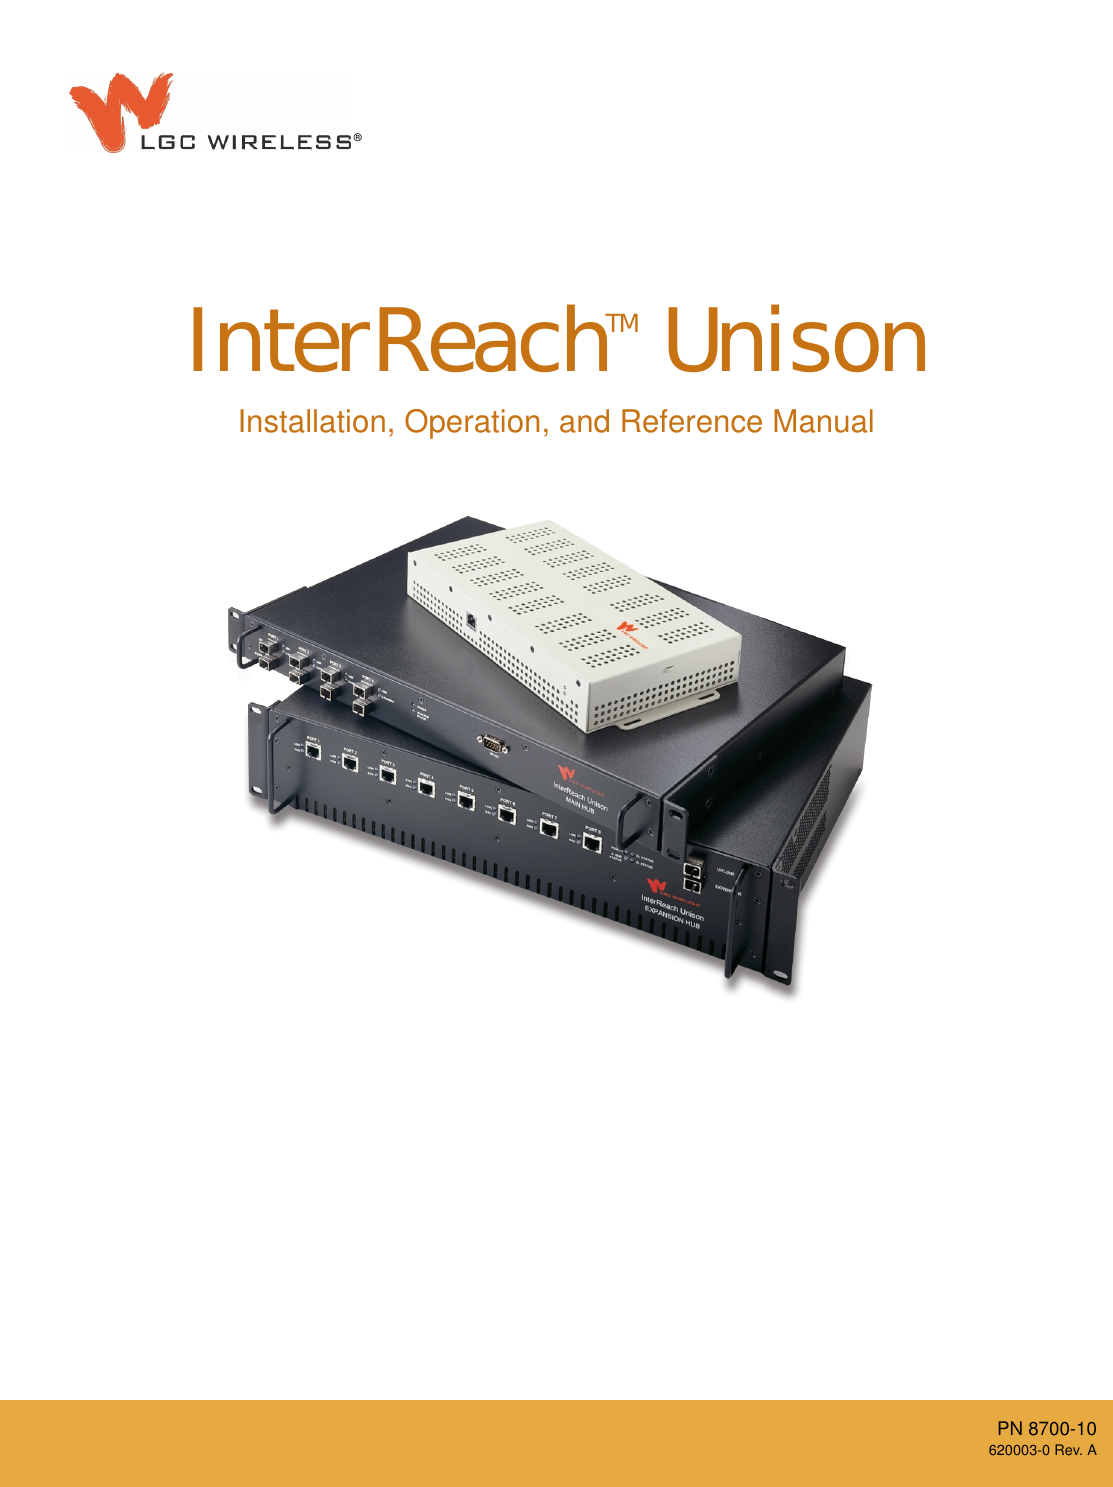 PN 8700-10620003-0 Rev. AInstallation, Operation, and Reference ManualInterReach UnisonTM®